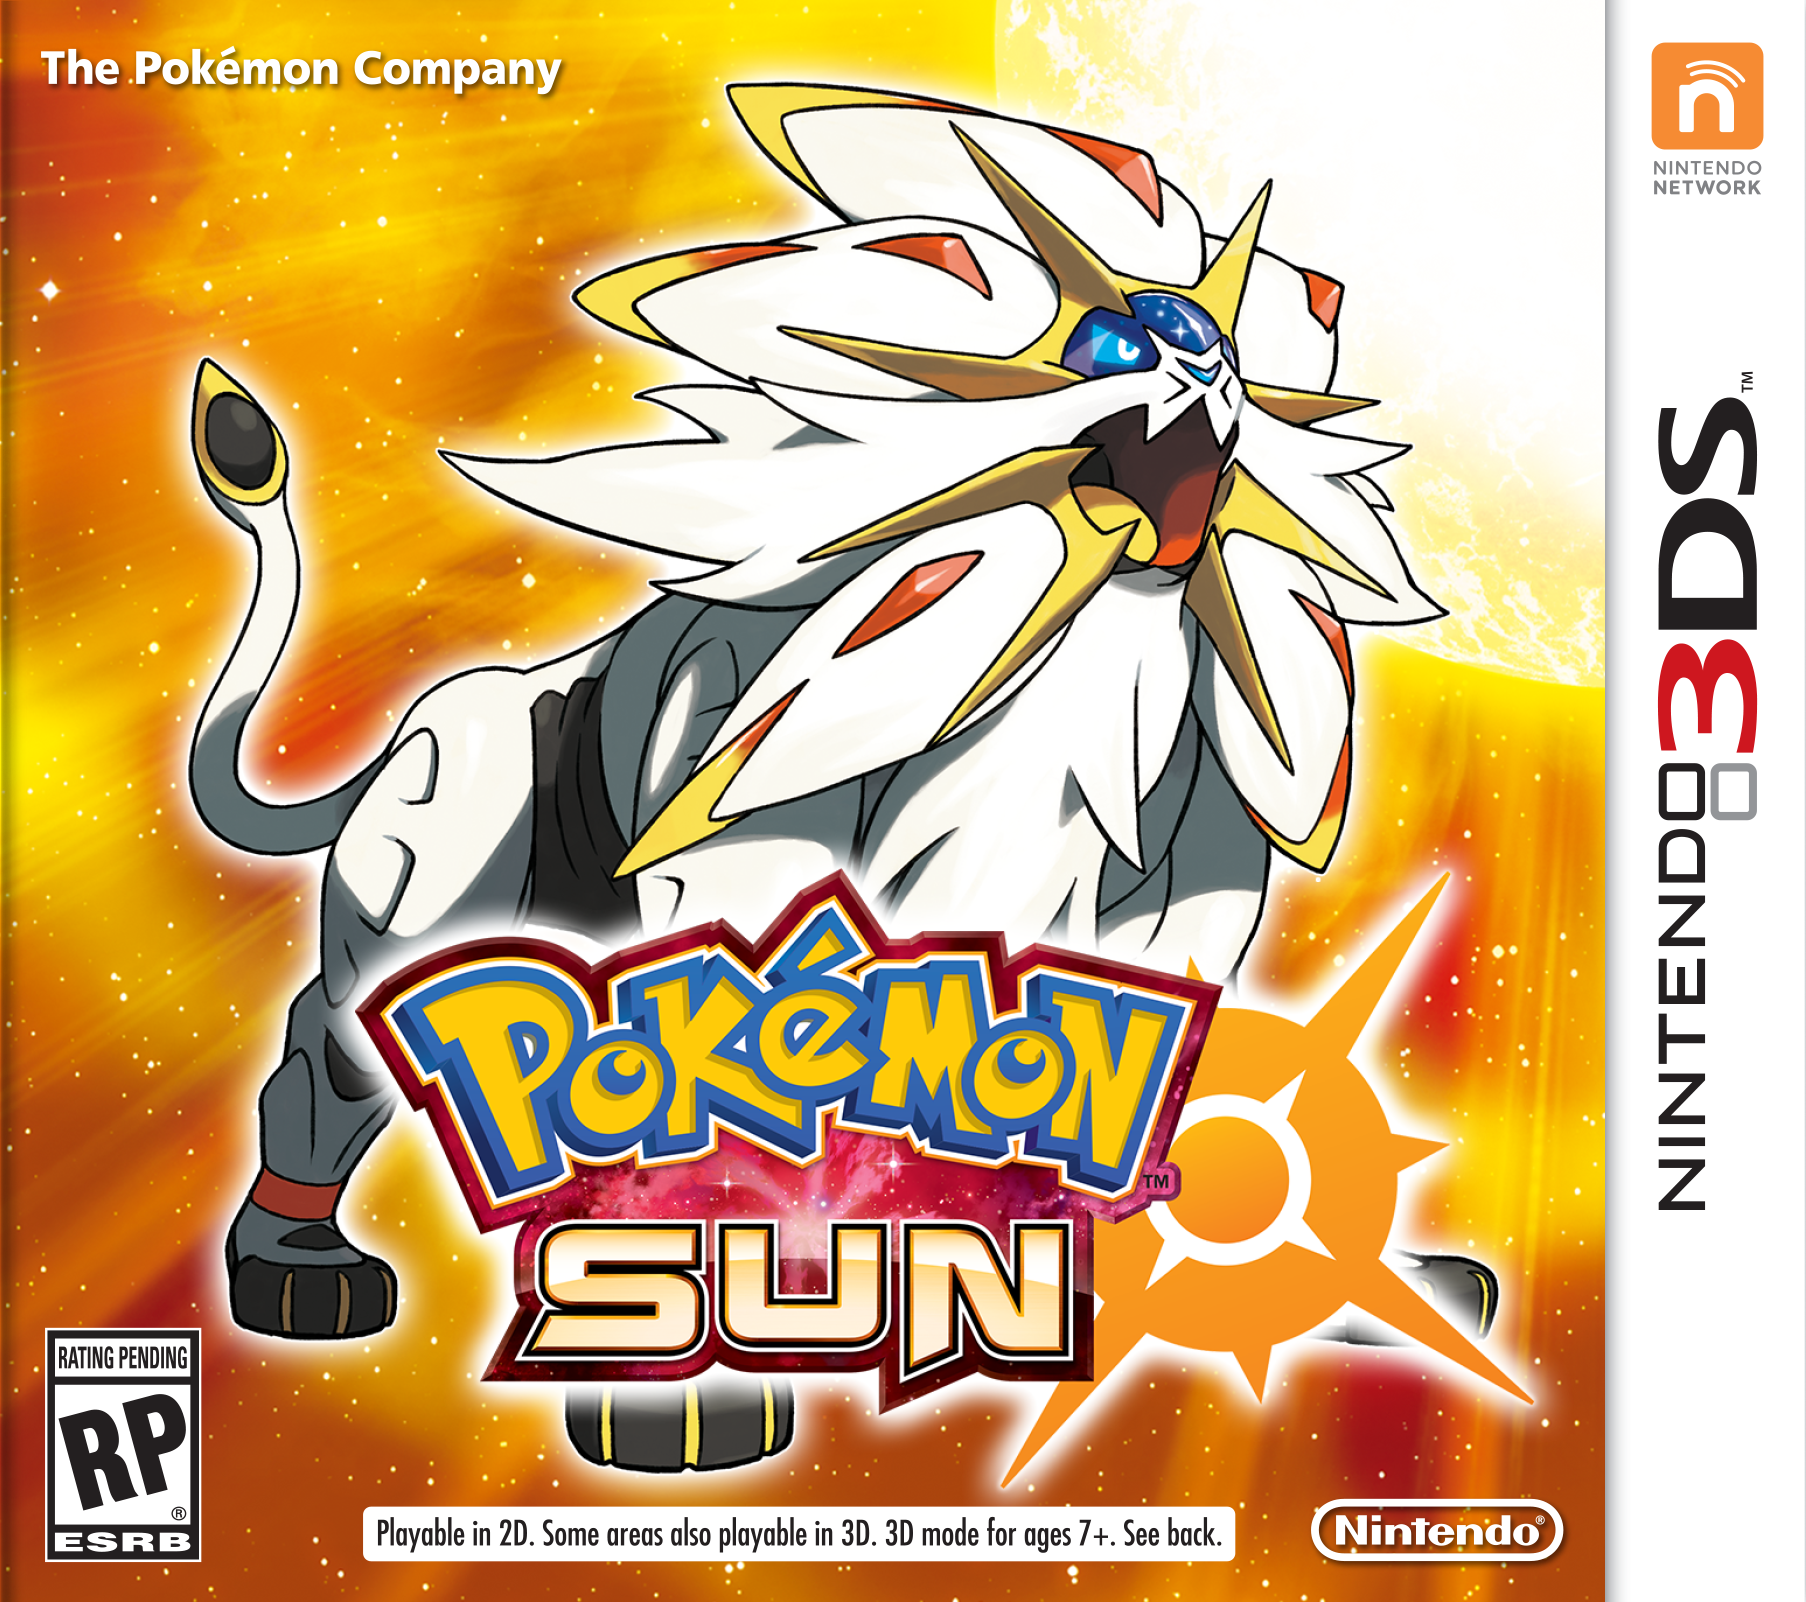 the box art for pokemon sun. it features solgaleo on a bright orange background with a shining sun in the top right corner